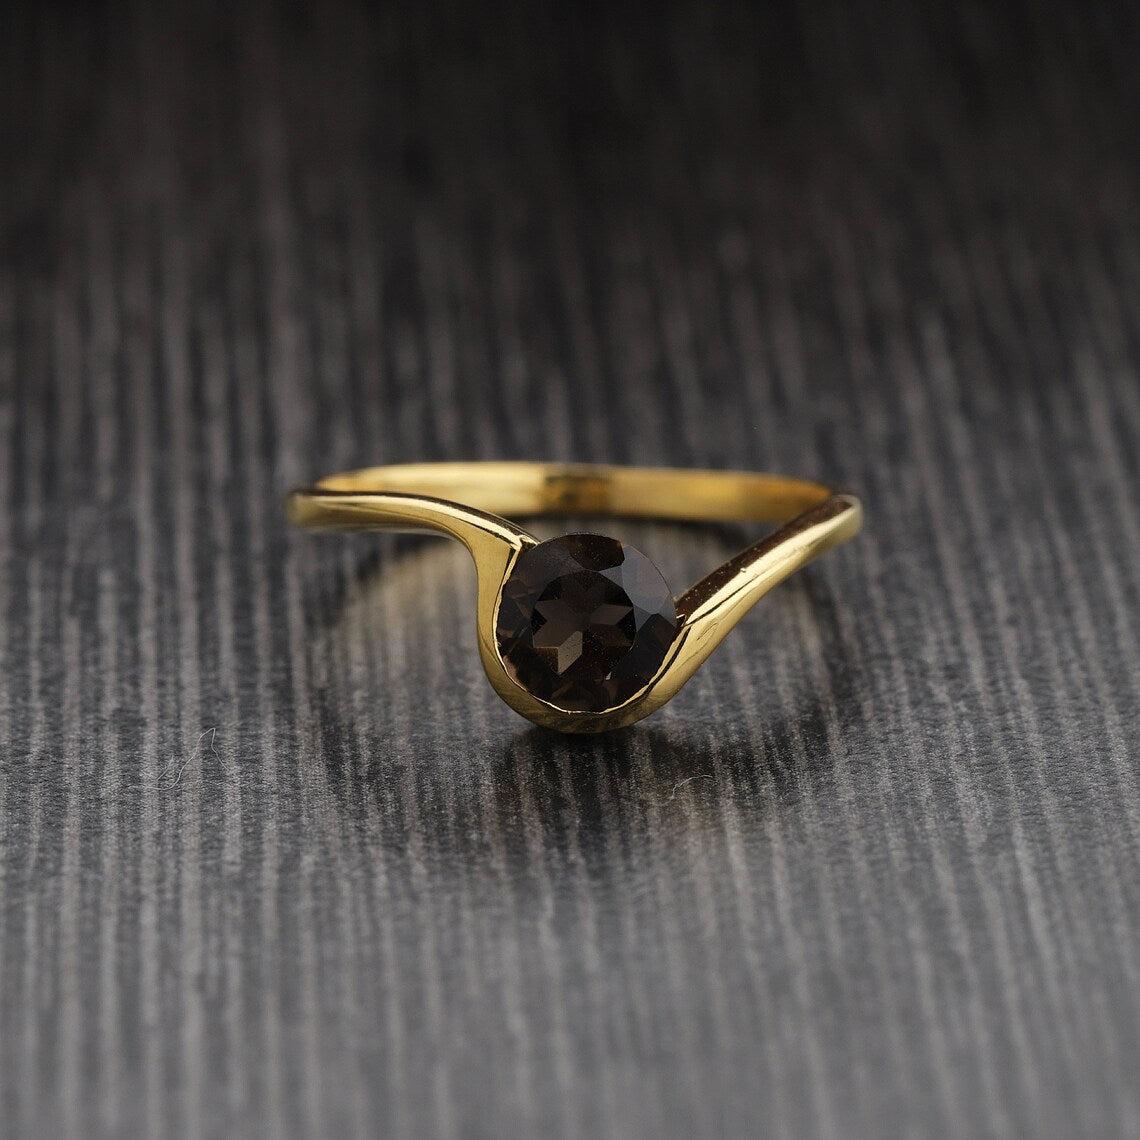 Smoky Quartz Ring - Gold Plated Ring - 5x5mm Round Cut Sterling Silver Smoky Ring - Handmade Indian Jewelry